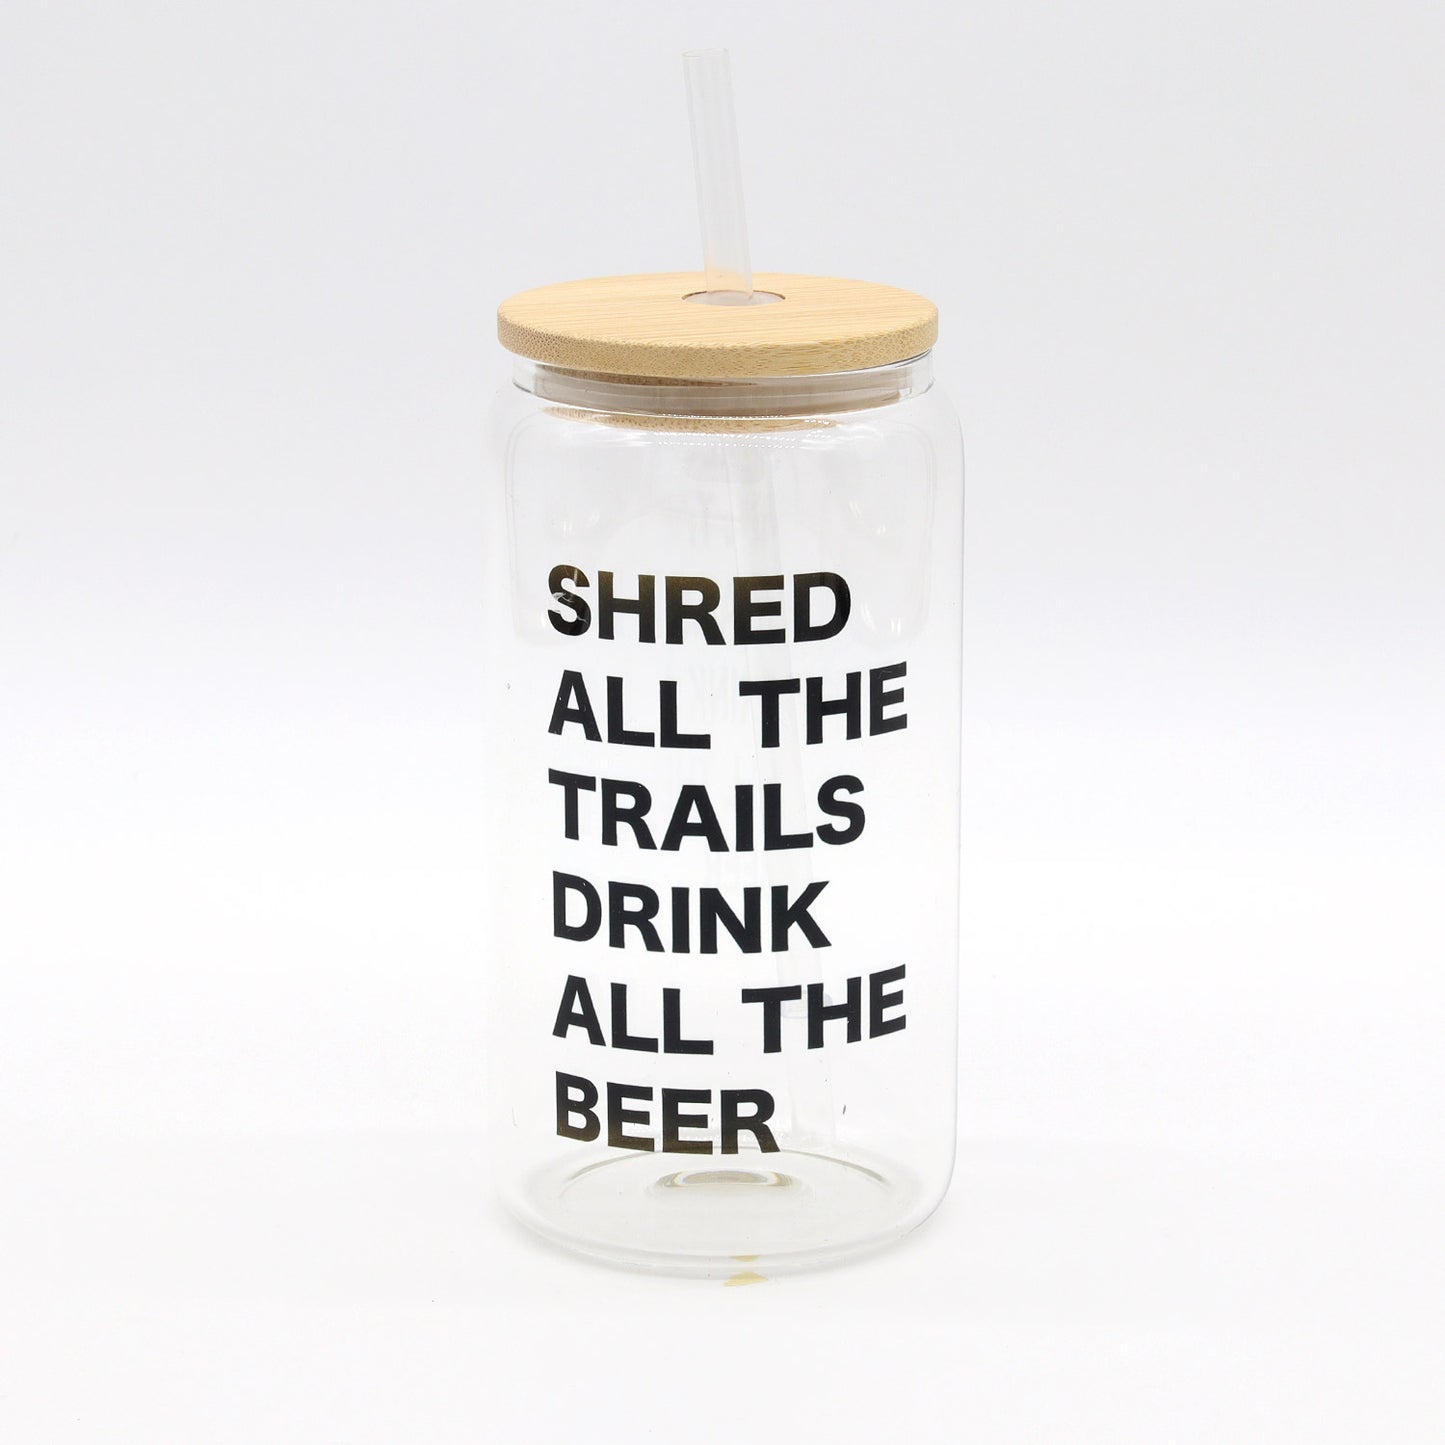 Shred all the Trails | Drink all the Beer | Bike | Mountain Biking | Cyclist